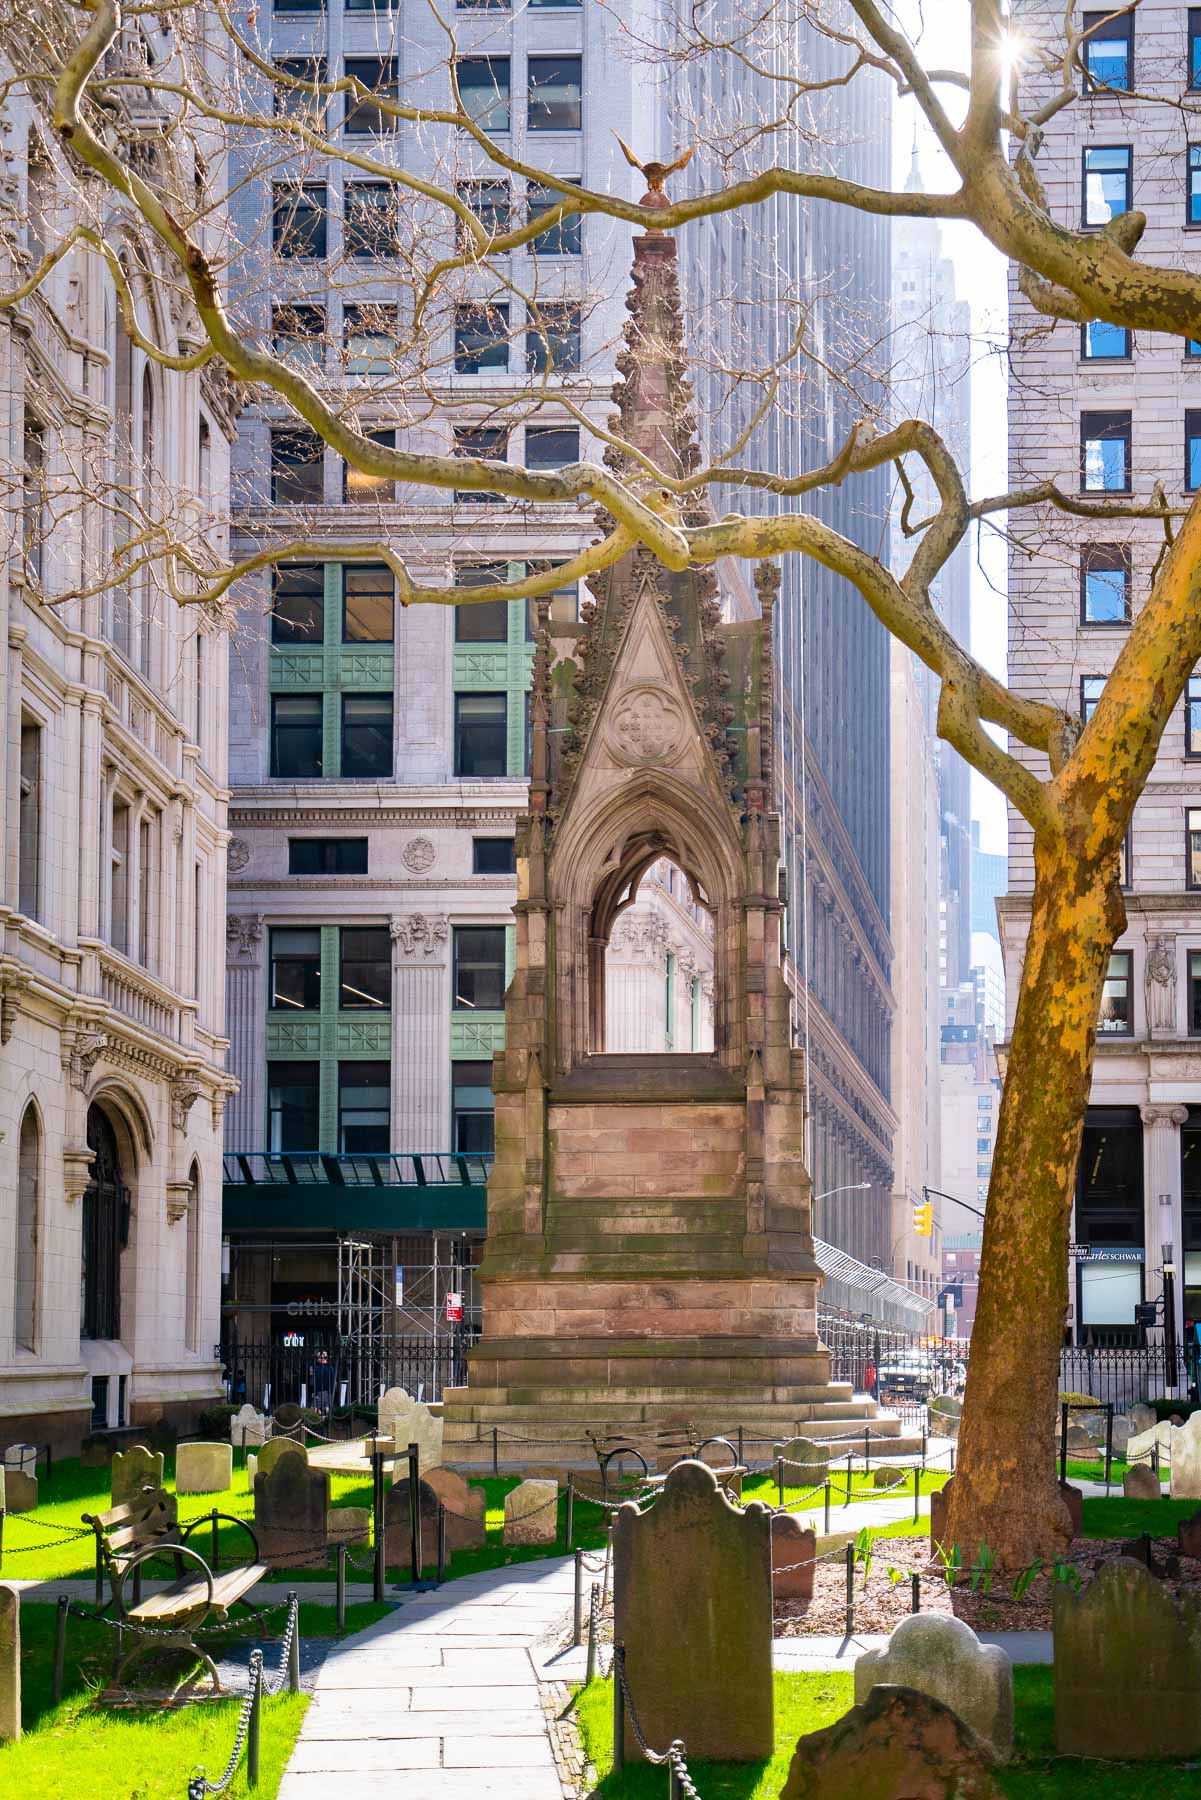 The Soldier's Monument at Trinity Church, near where Alexander Hamilton is buried in NYC